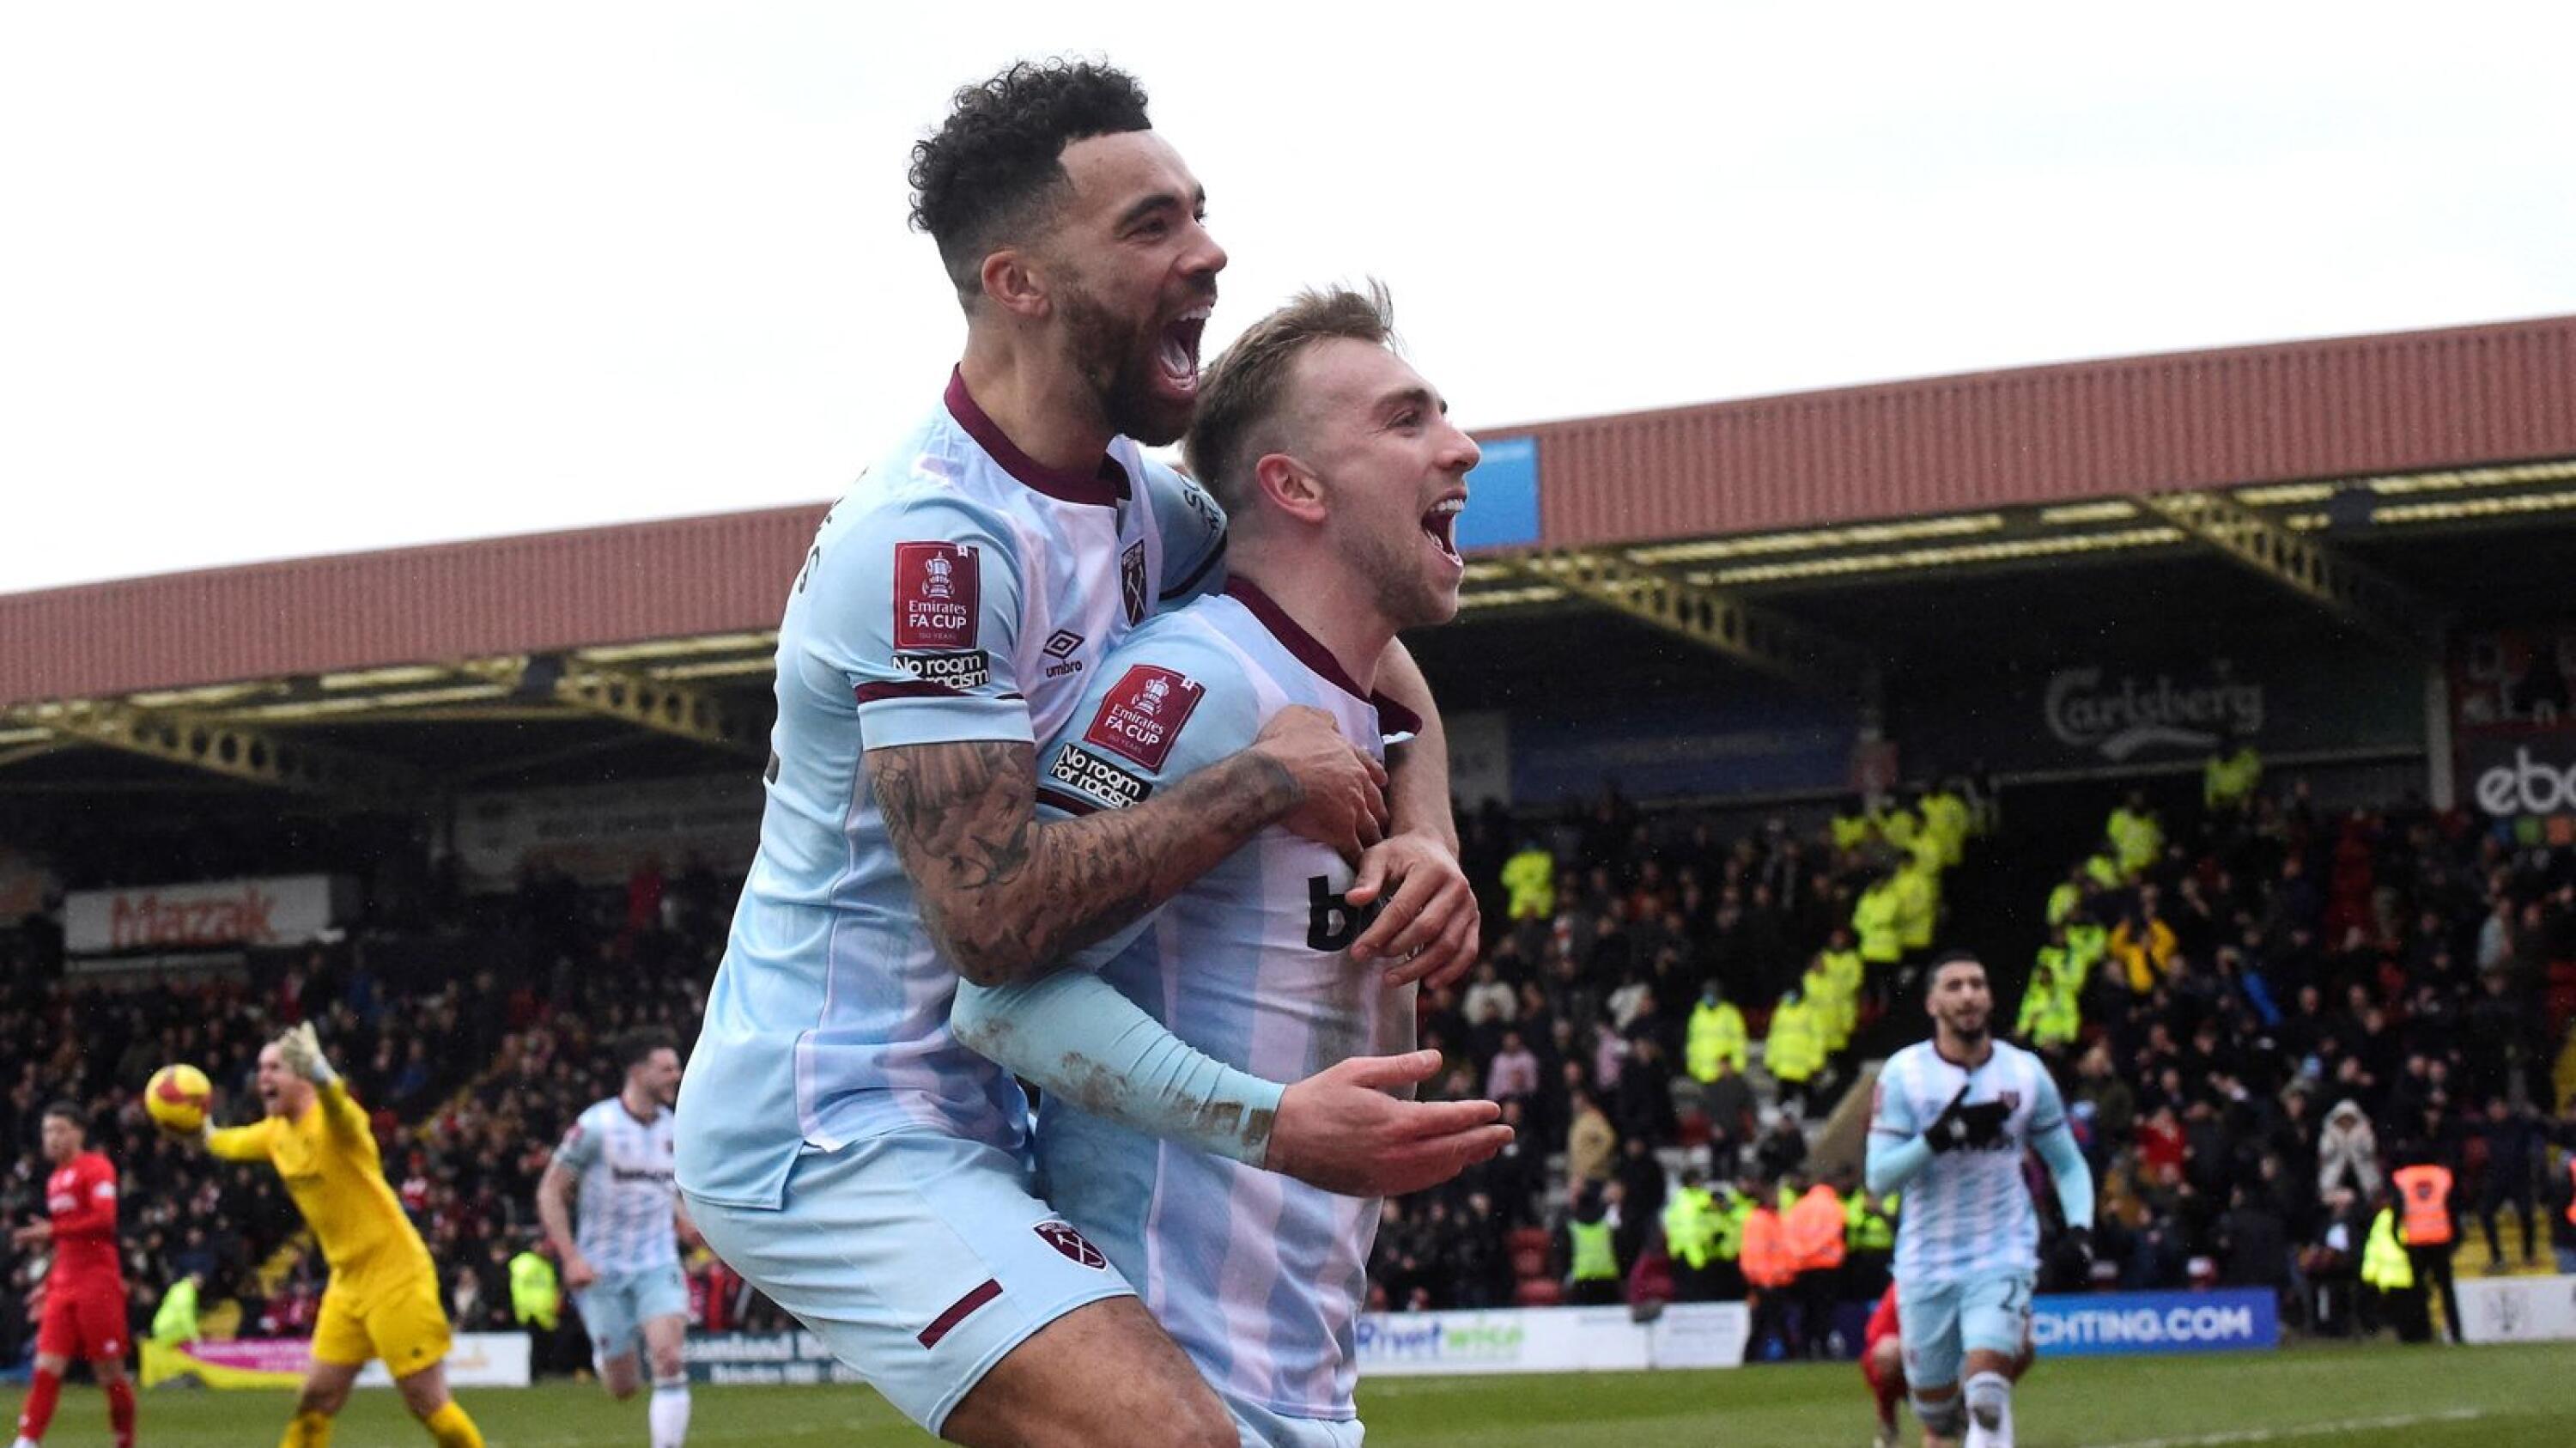 West Ham United's Jarrod Bowen celebrates with Ryan Fredericks after scoring the winning goal during their FA Cup fourth round game against Kidderminster Harriers on Saturday